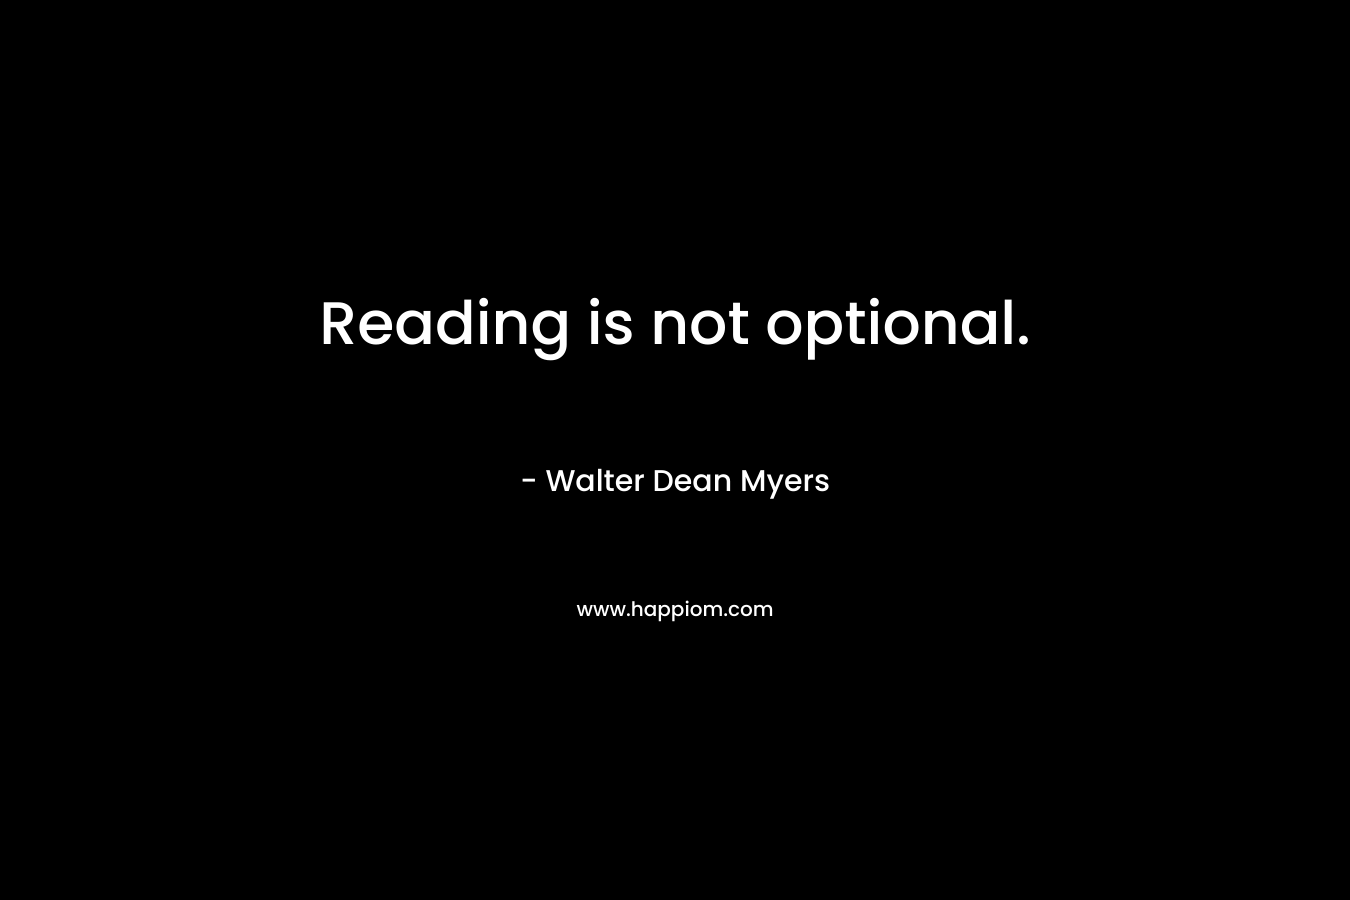 Reading is not optional. – Walter Dean Myers